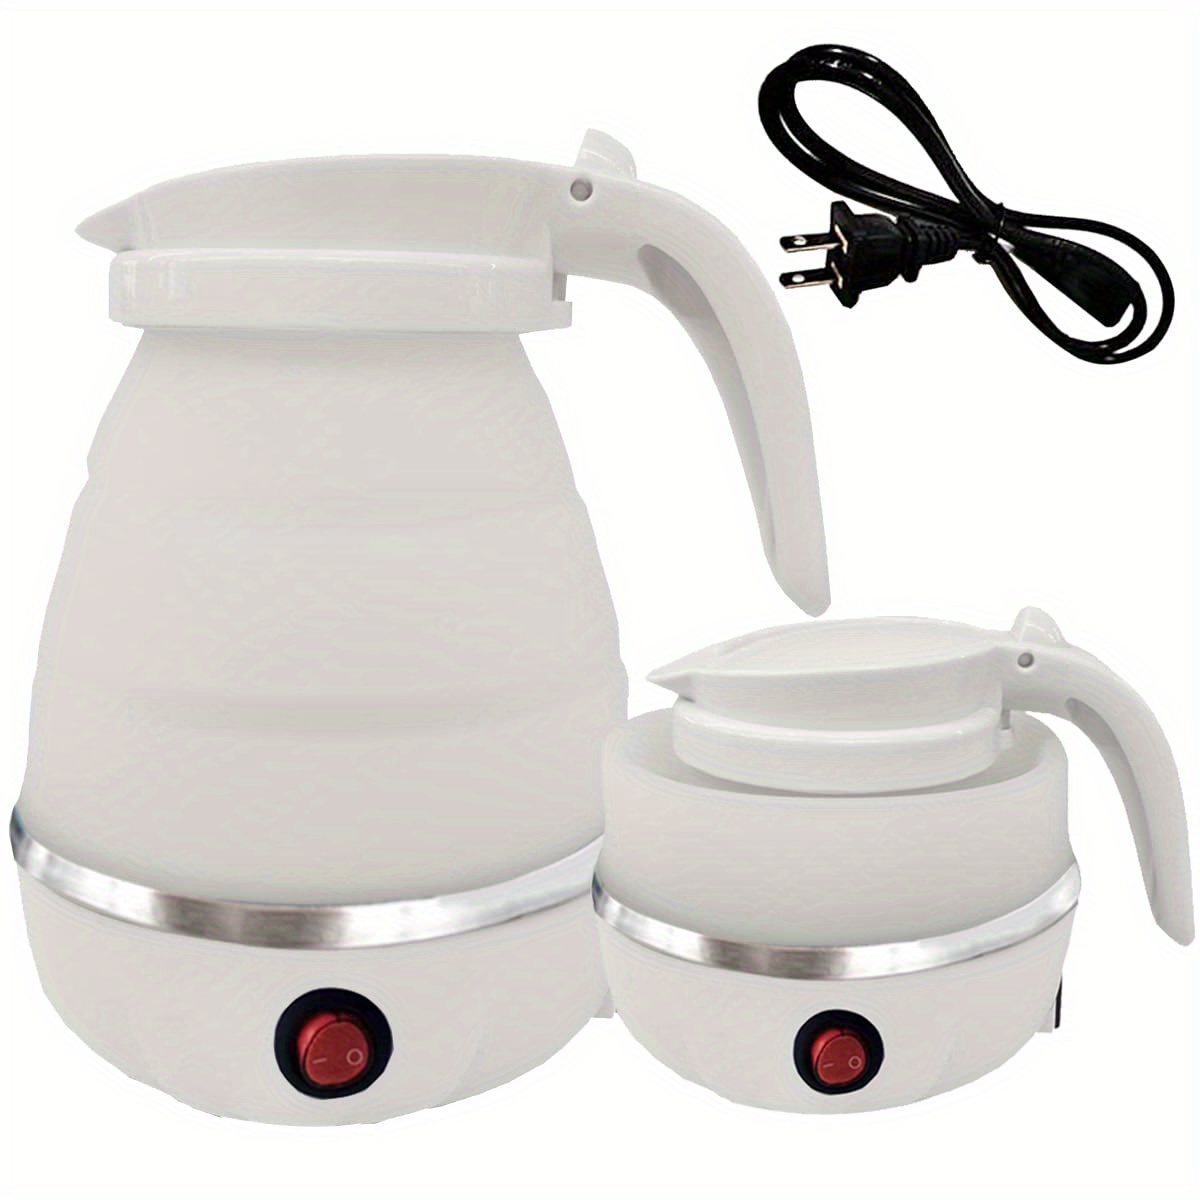  Omabeta Small Electric Kettle Travel Kettle Foldable